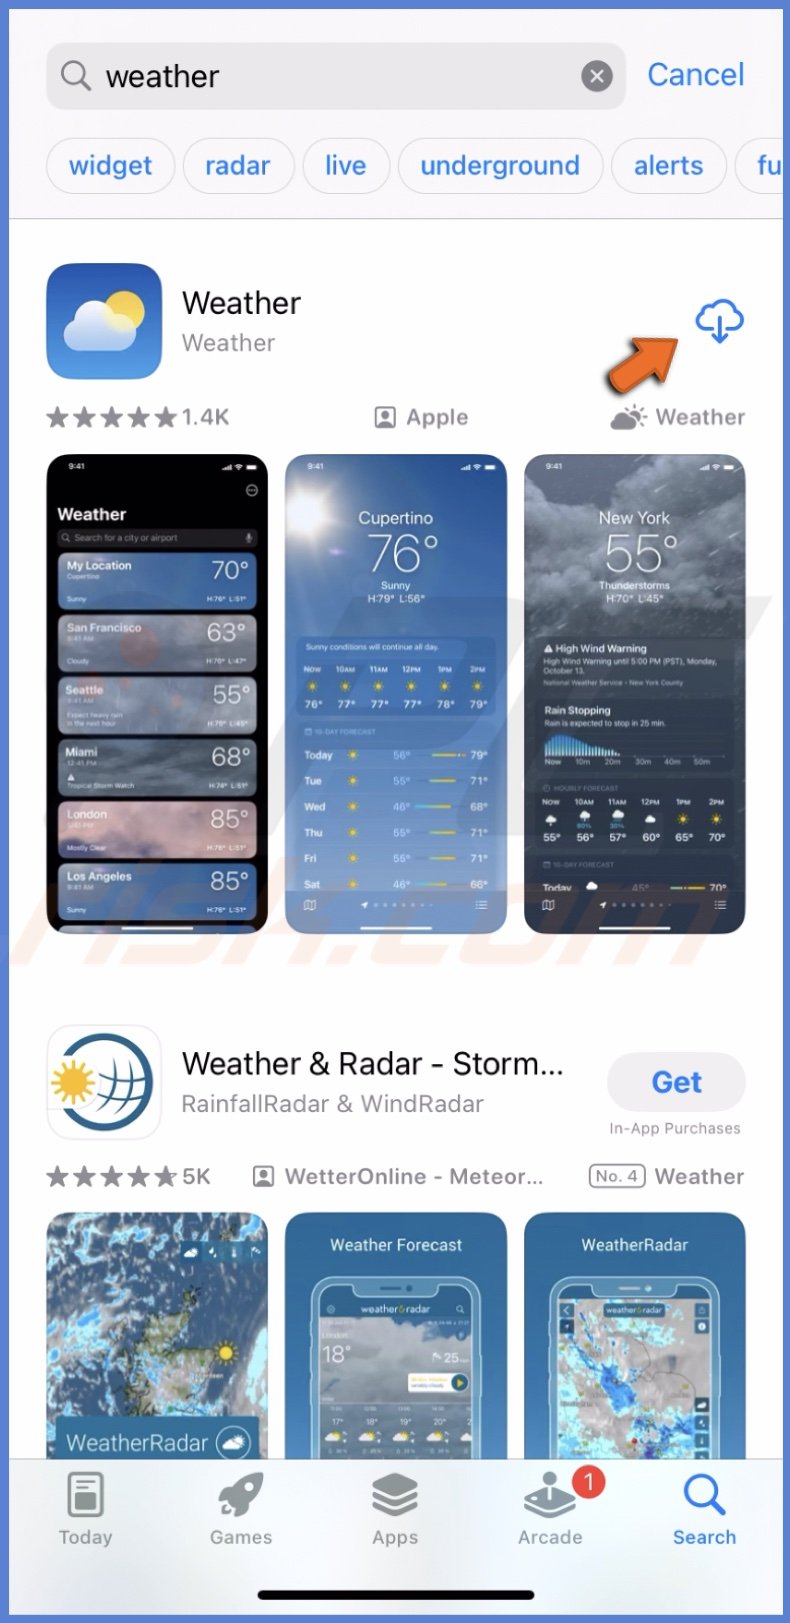 Re-download the Weather app